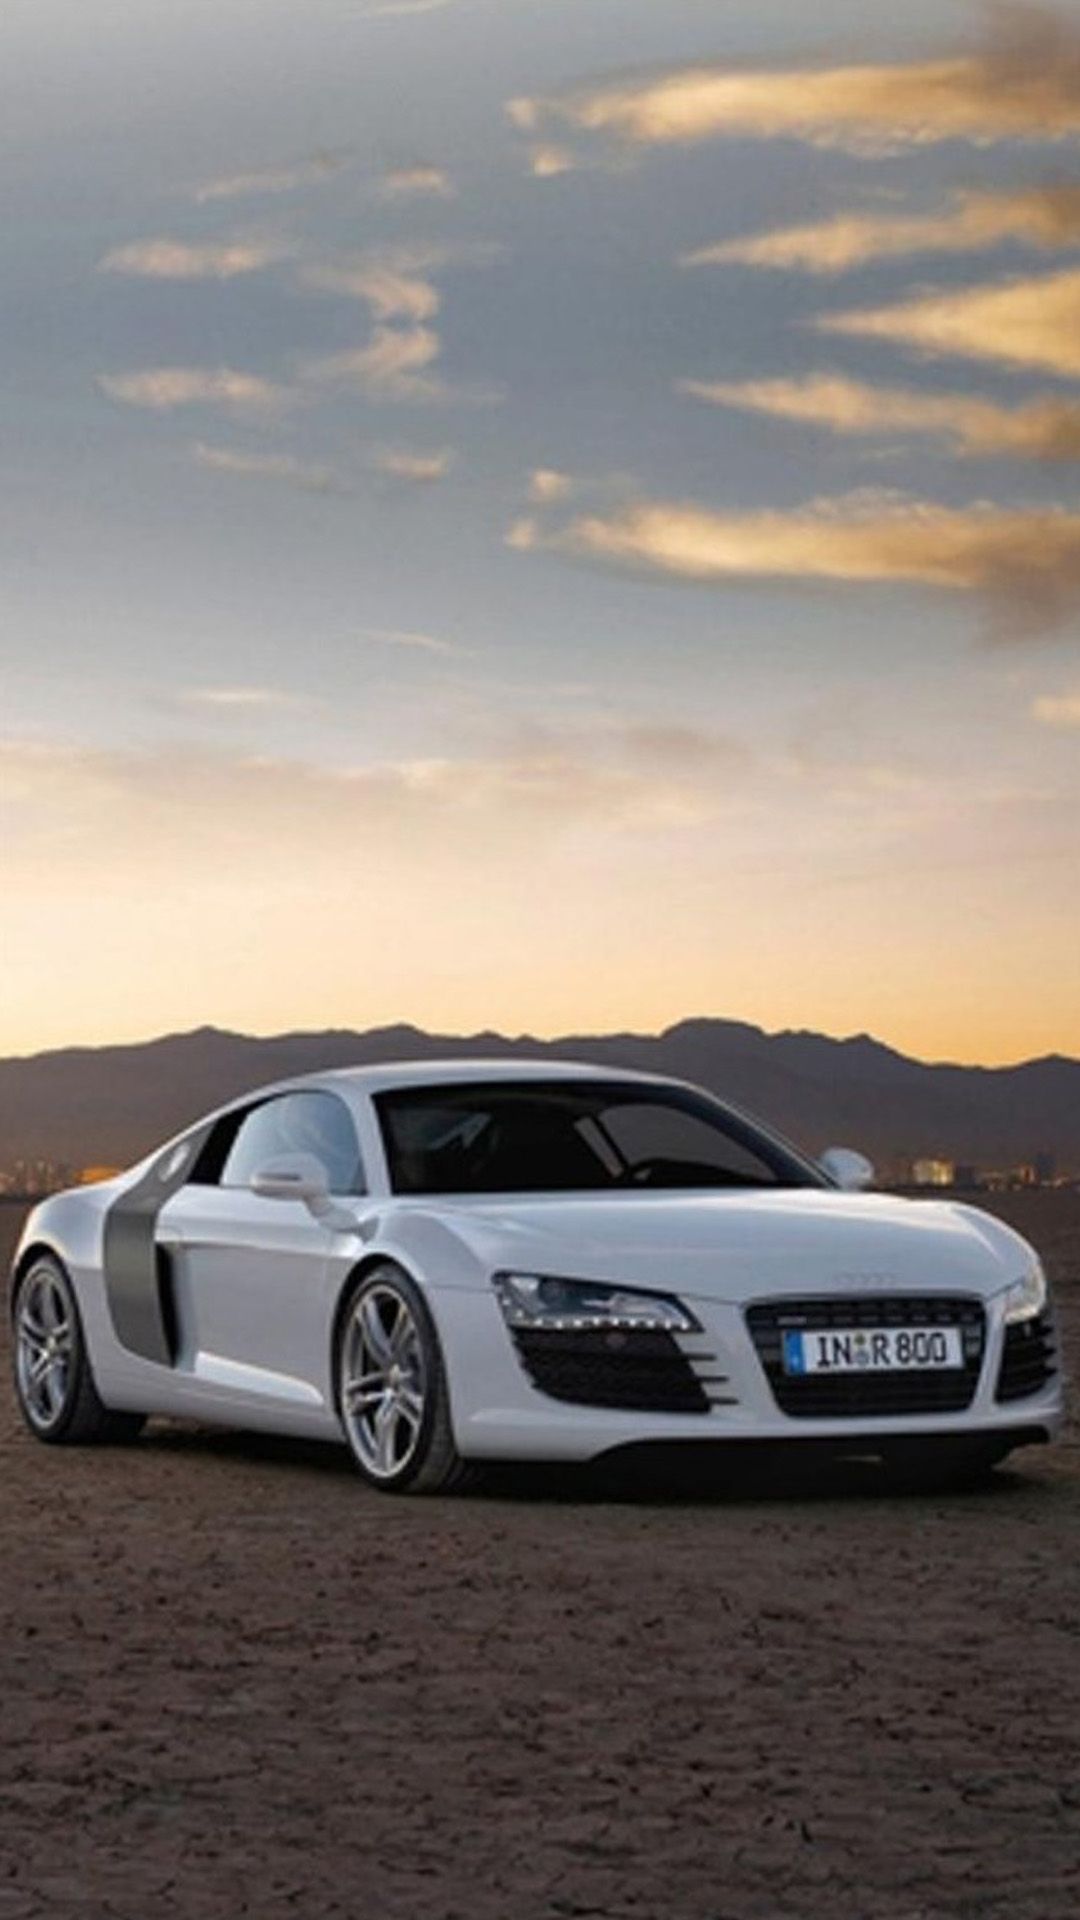 Download Free Photo Car iPhone R8 iPhone Background